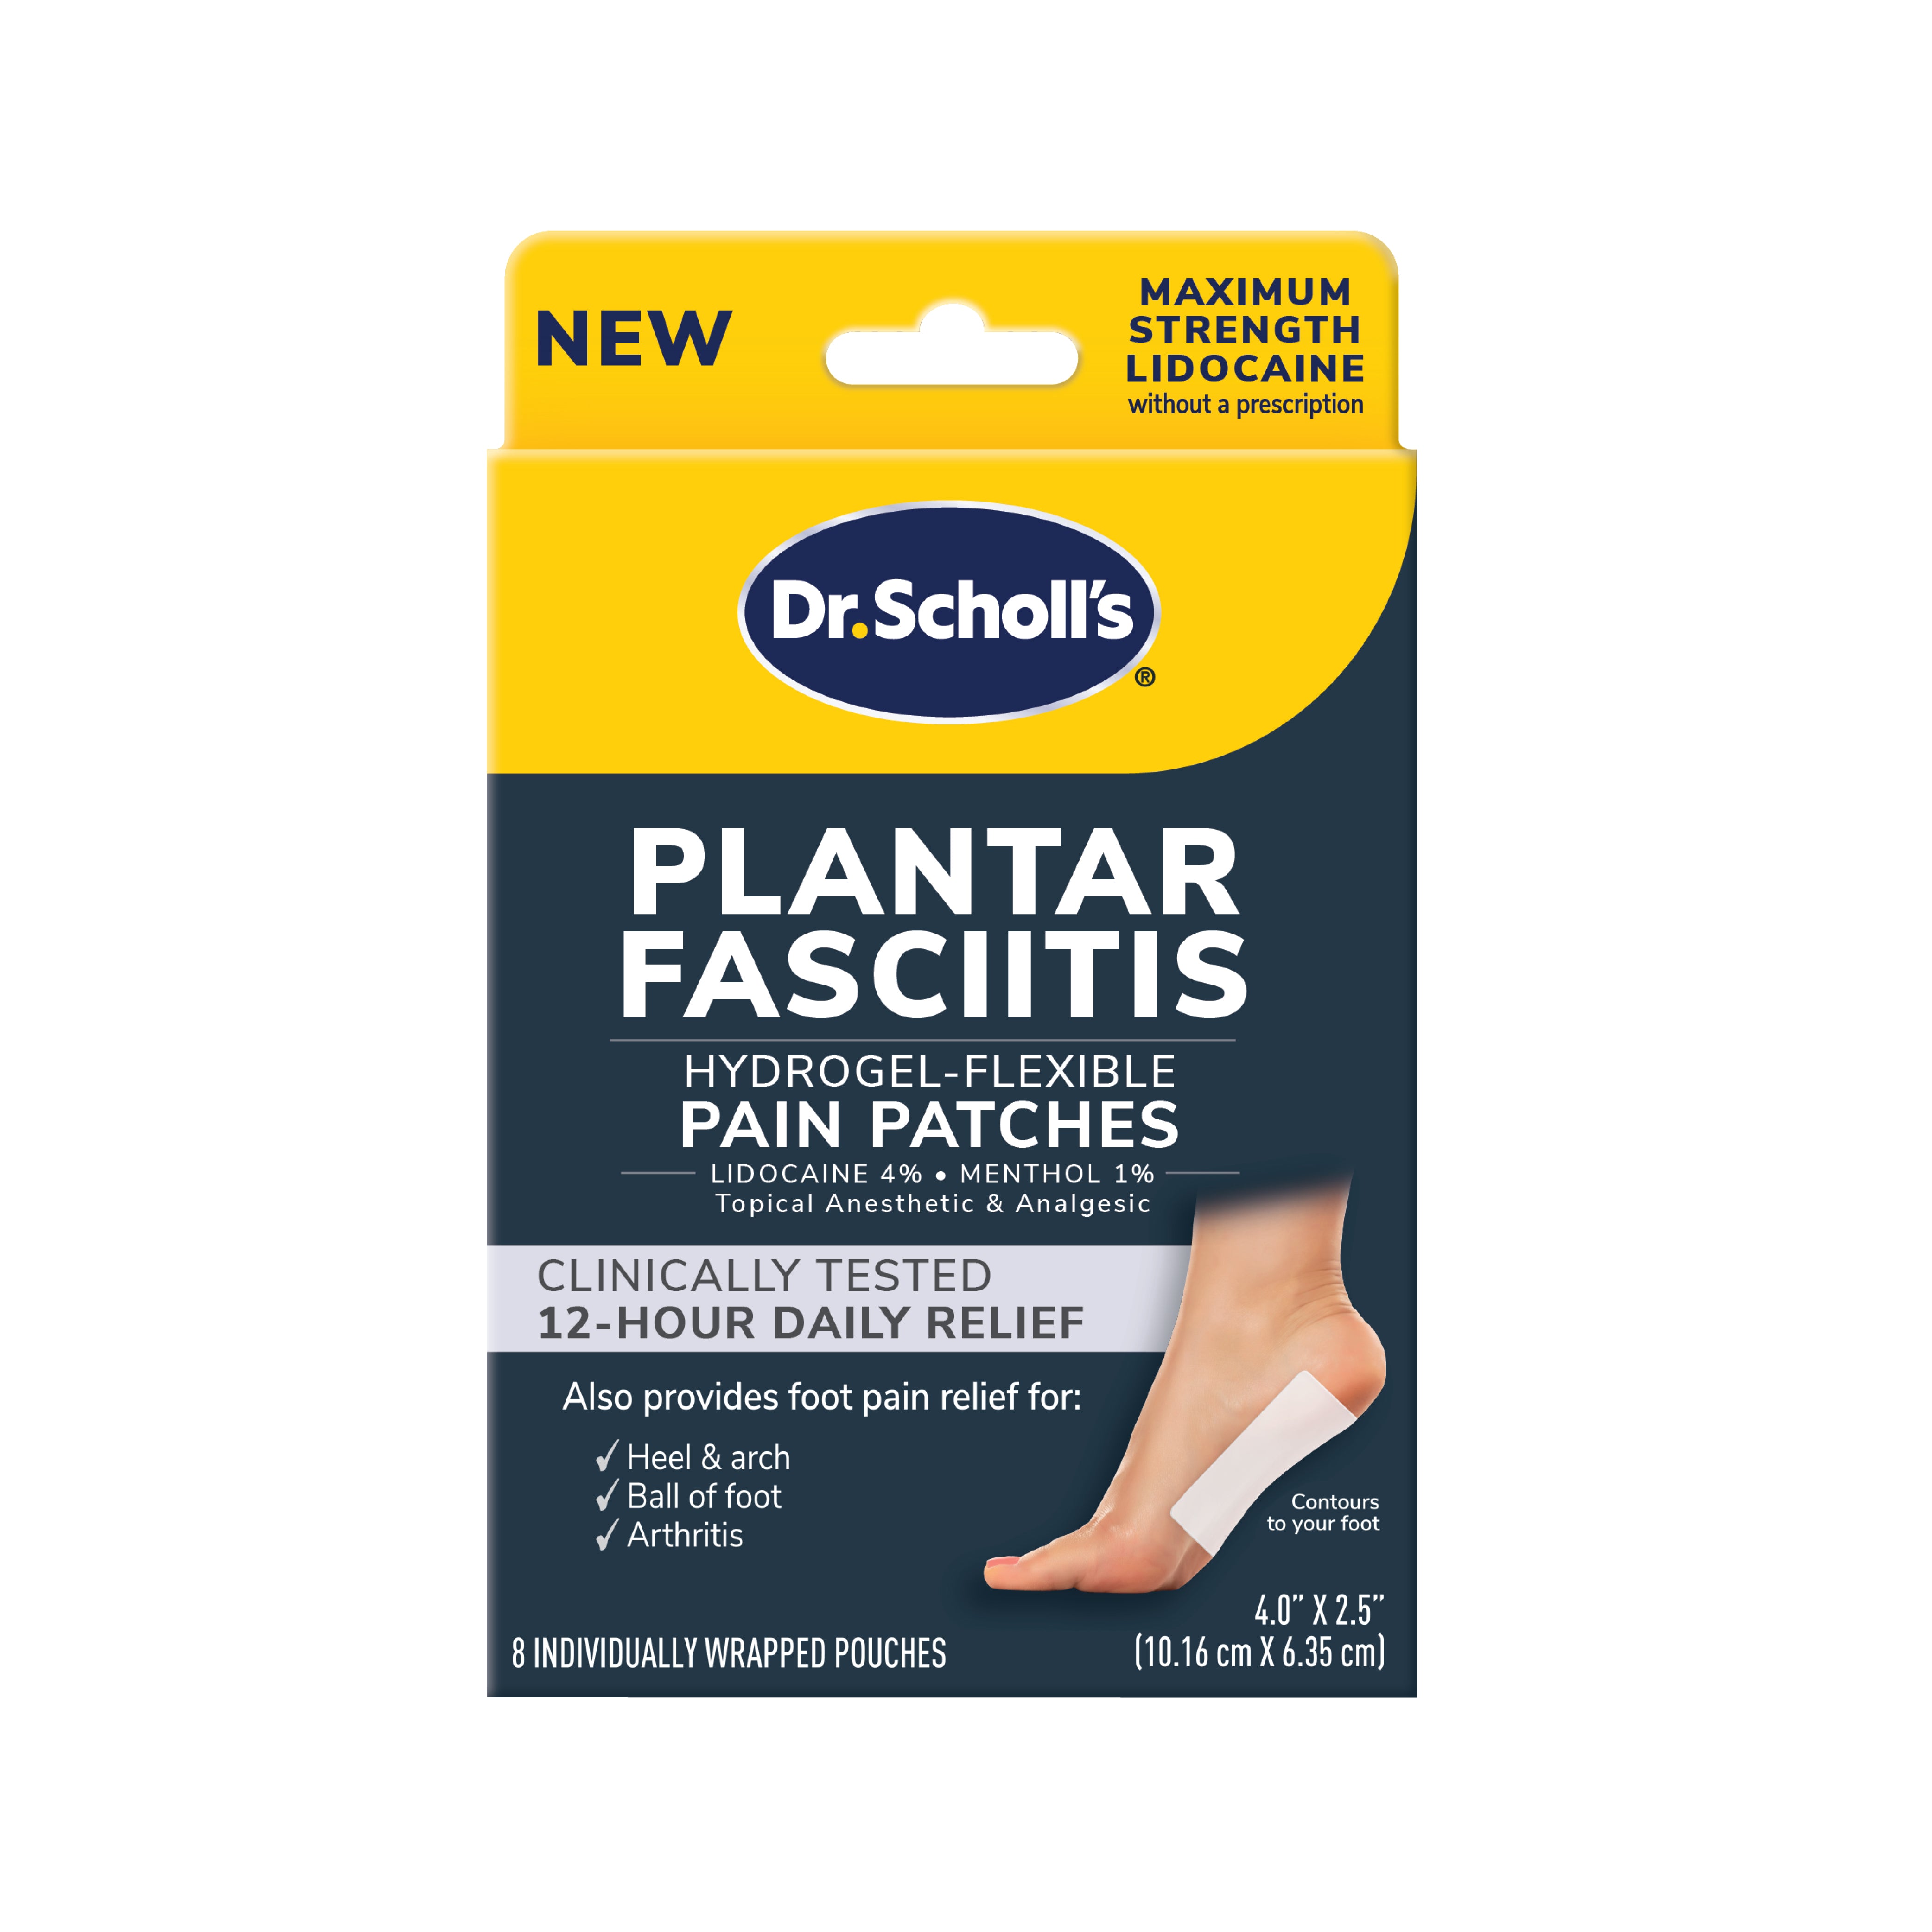 Plantar Fasciitis Pain Patches with Hydrogel-Flexible Technology – DrScholls